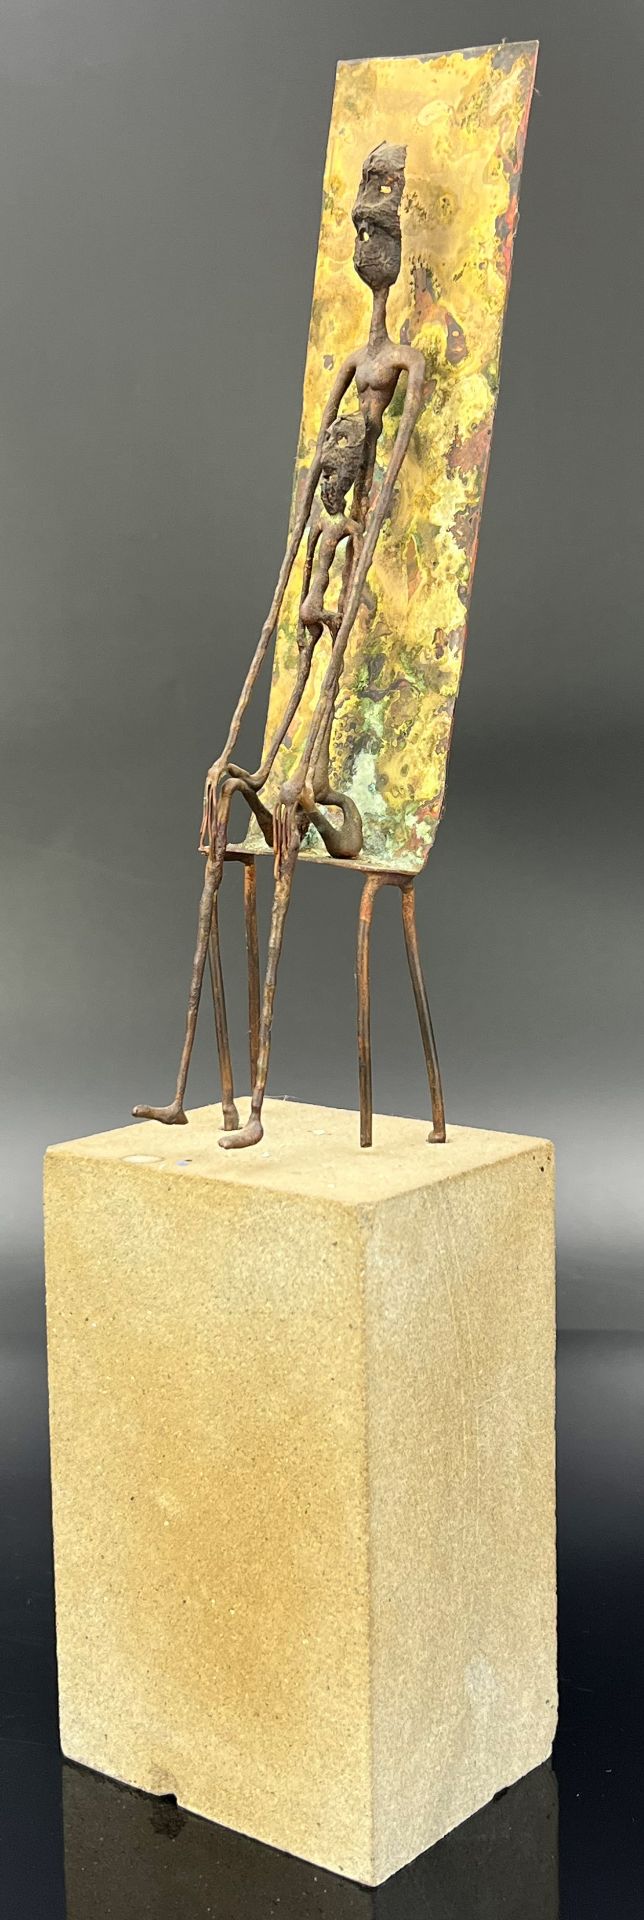 E.A. LANGENBERG (1953). Bronze. "Patriarch". - Image 2 of 9